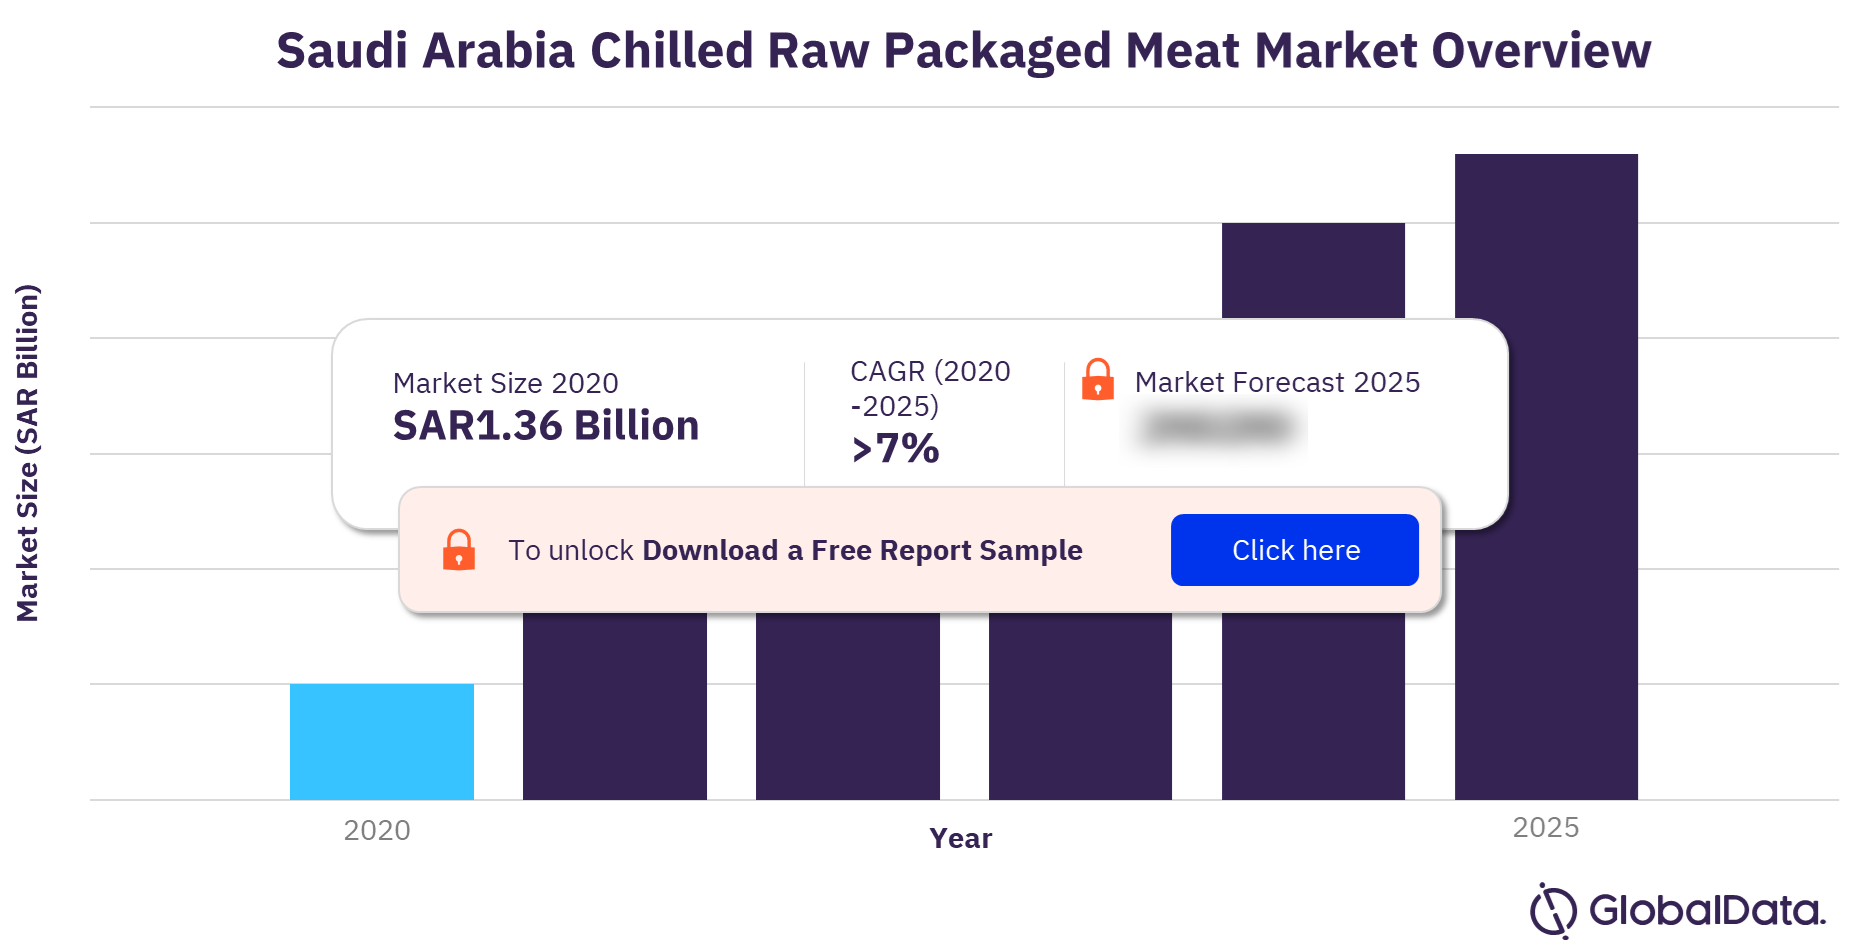 Saudi Arabia Chilled Raw Packaged Meat Market Outlook